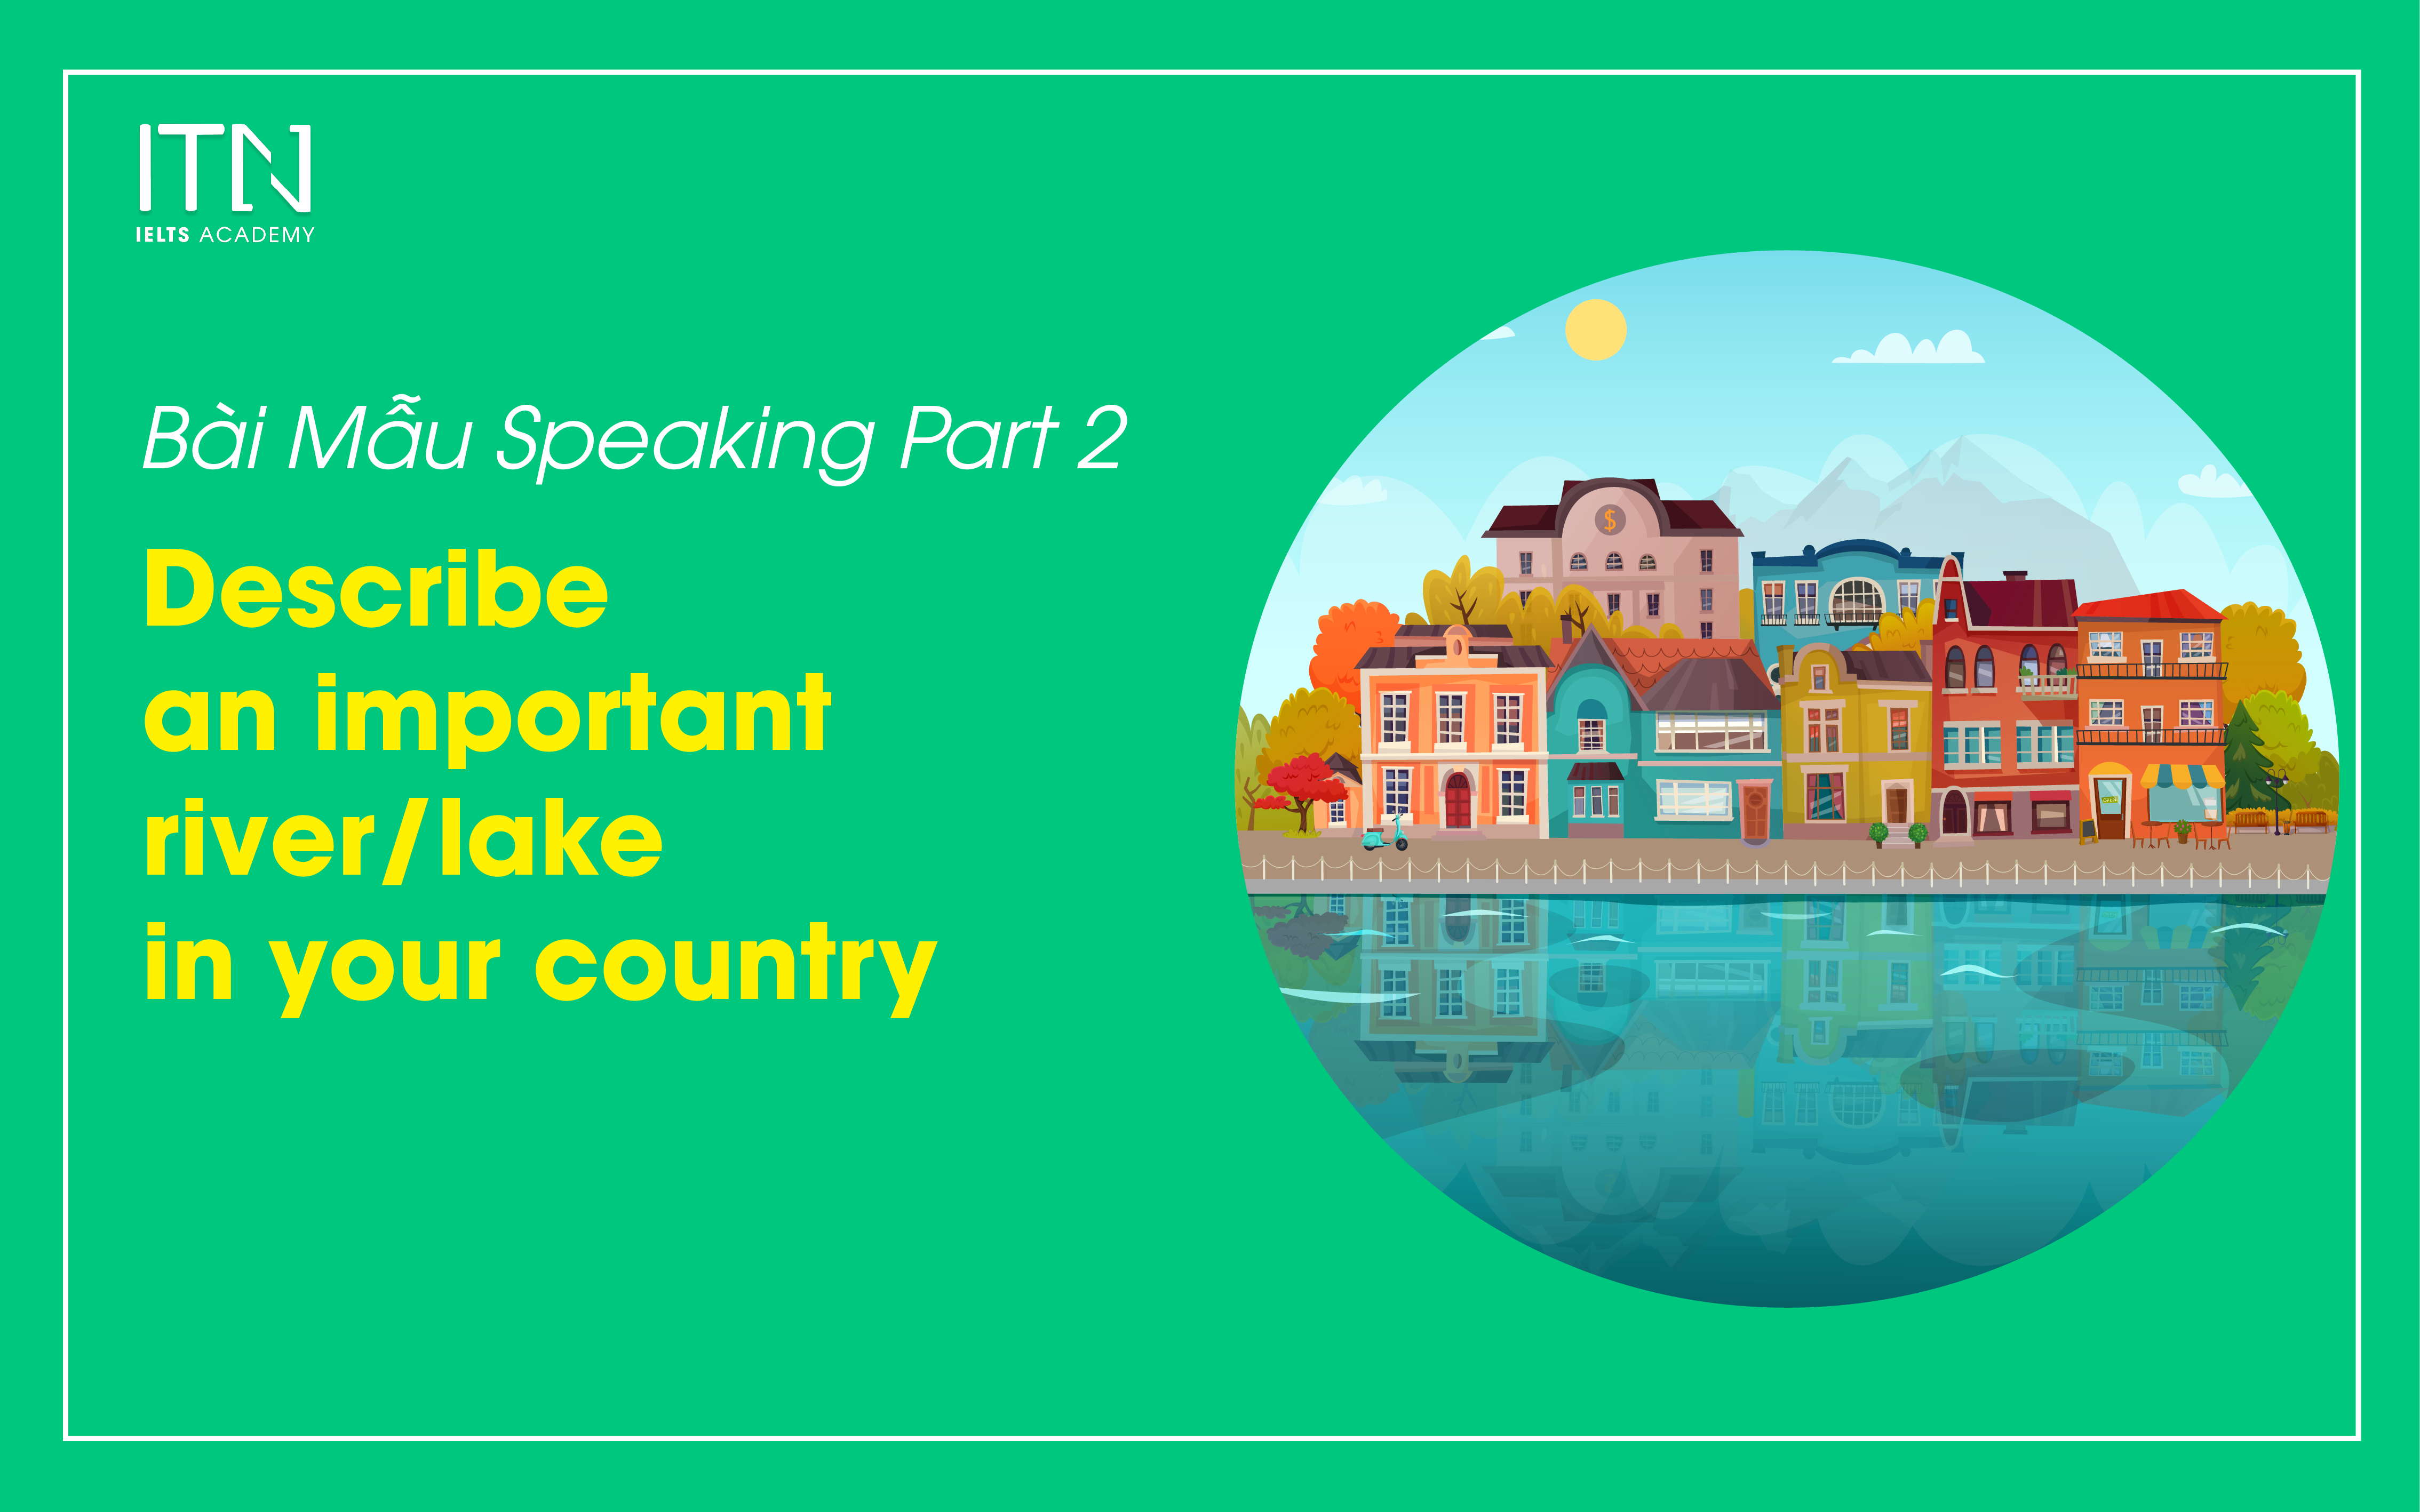 DESCRIBE AN IMPORTANT LAKE/RIVER IN YOUR COUNTRY - Bài Mẫu Speaking Part 2